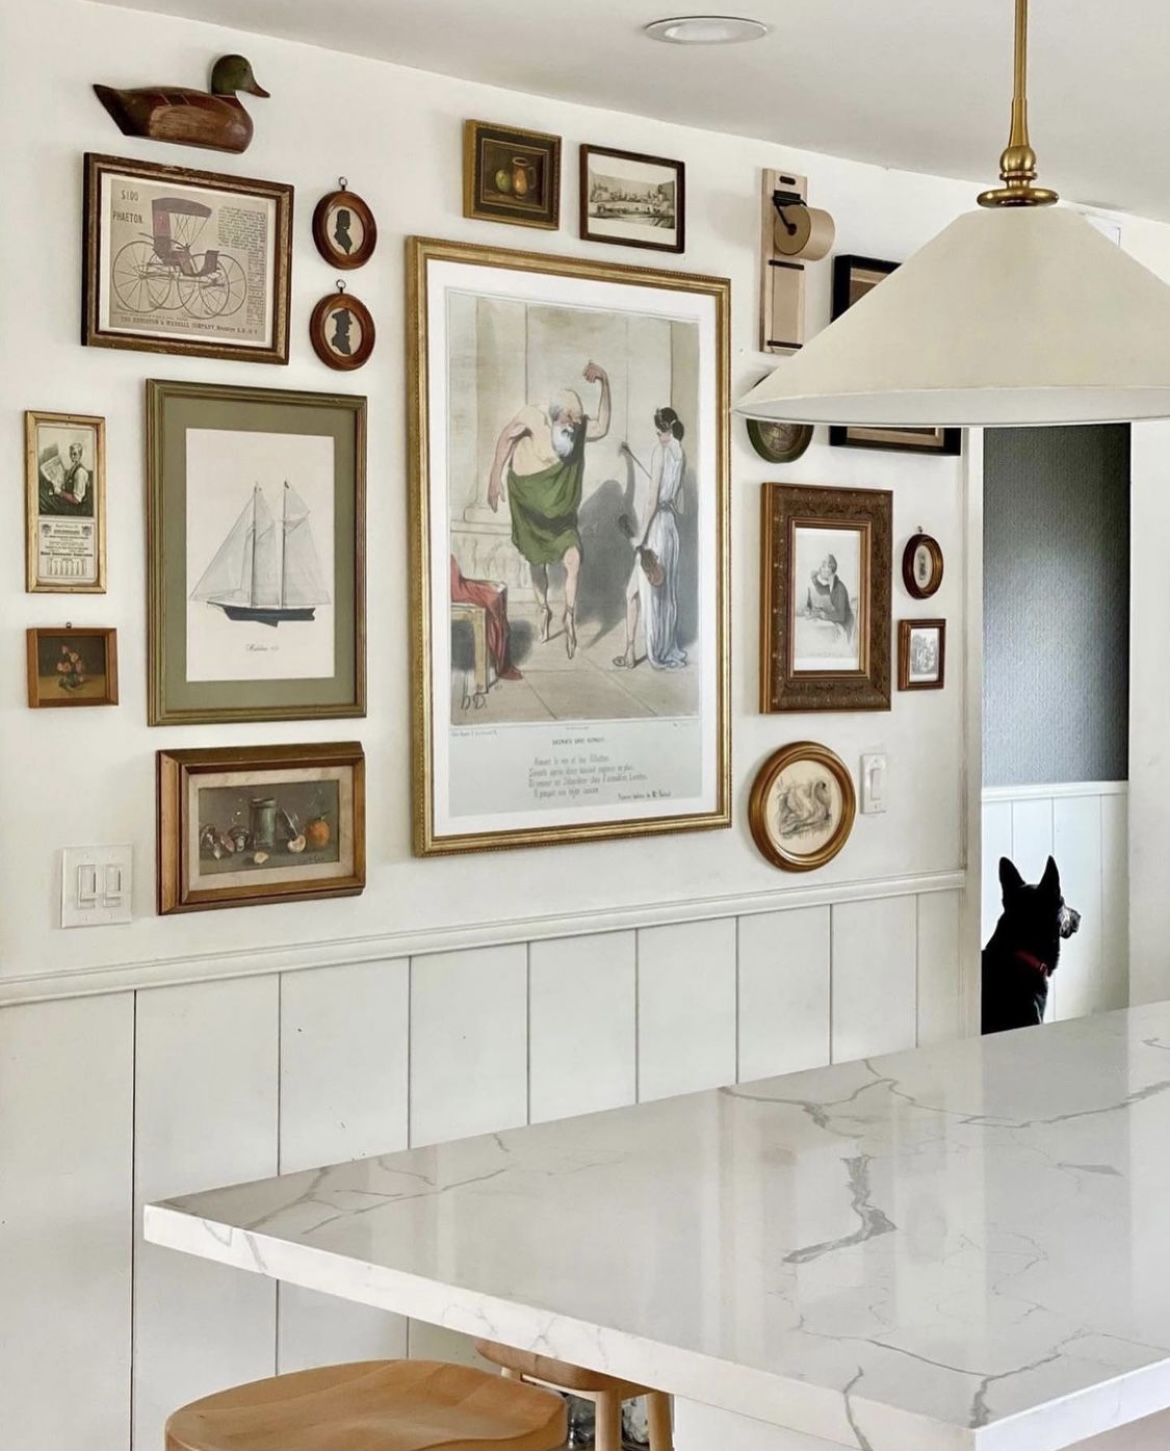 gallery wall in kitchen, gallery wall tips, kitchen renovation, quartz countertops, modern traditional, 1950s beach cottage, shiplap wainscotting, swiss coffee wall paint, white wall paint, modern traditional home, kitchen pendants, art in kitchen, gallery wall ideas